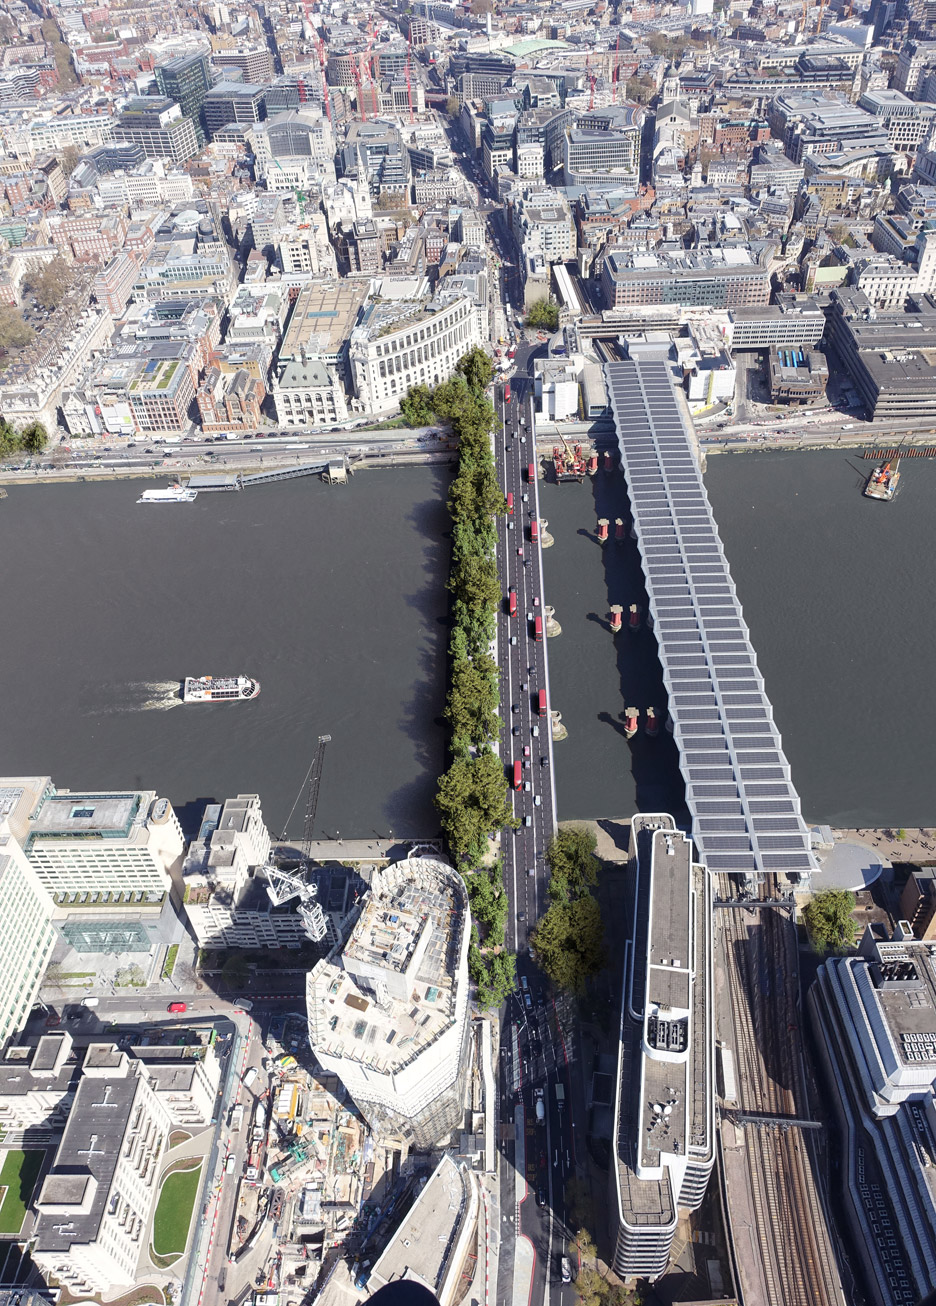 Allies and Morrison proposes alternative Garden Bridge at existing Blackfriars crossing